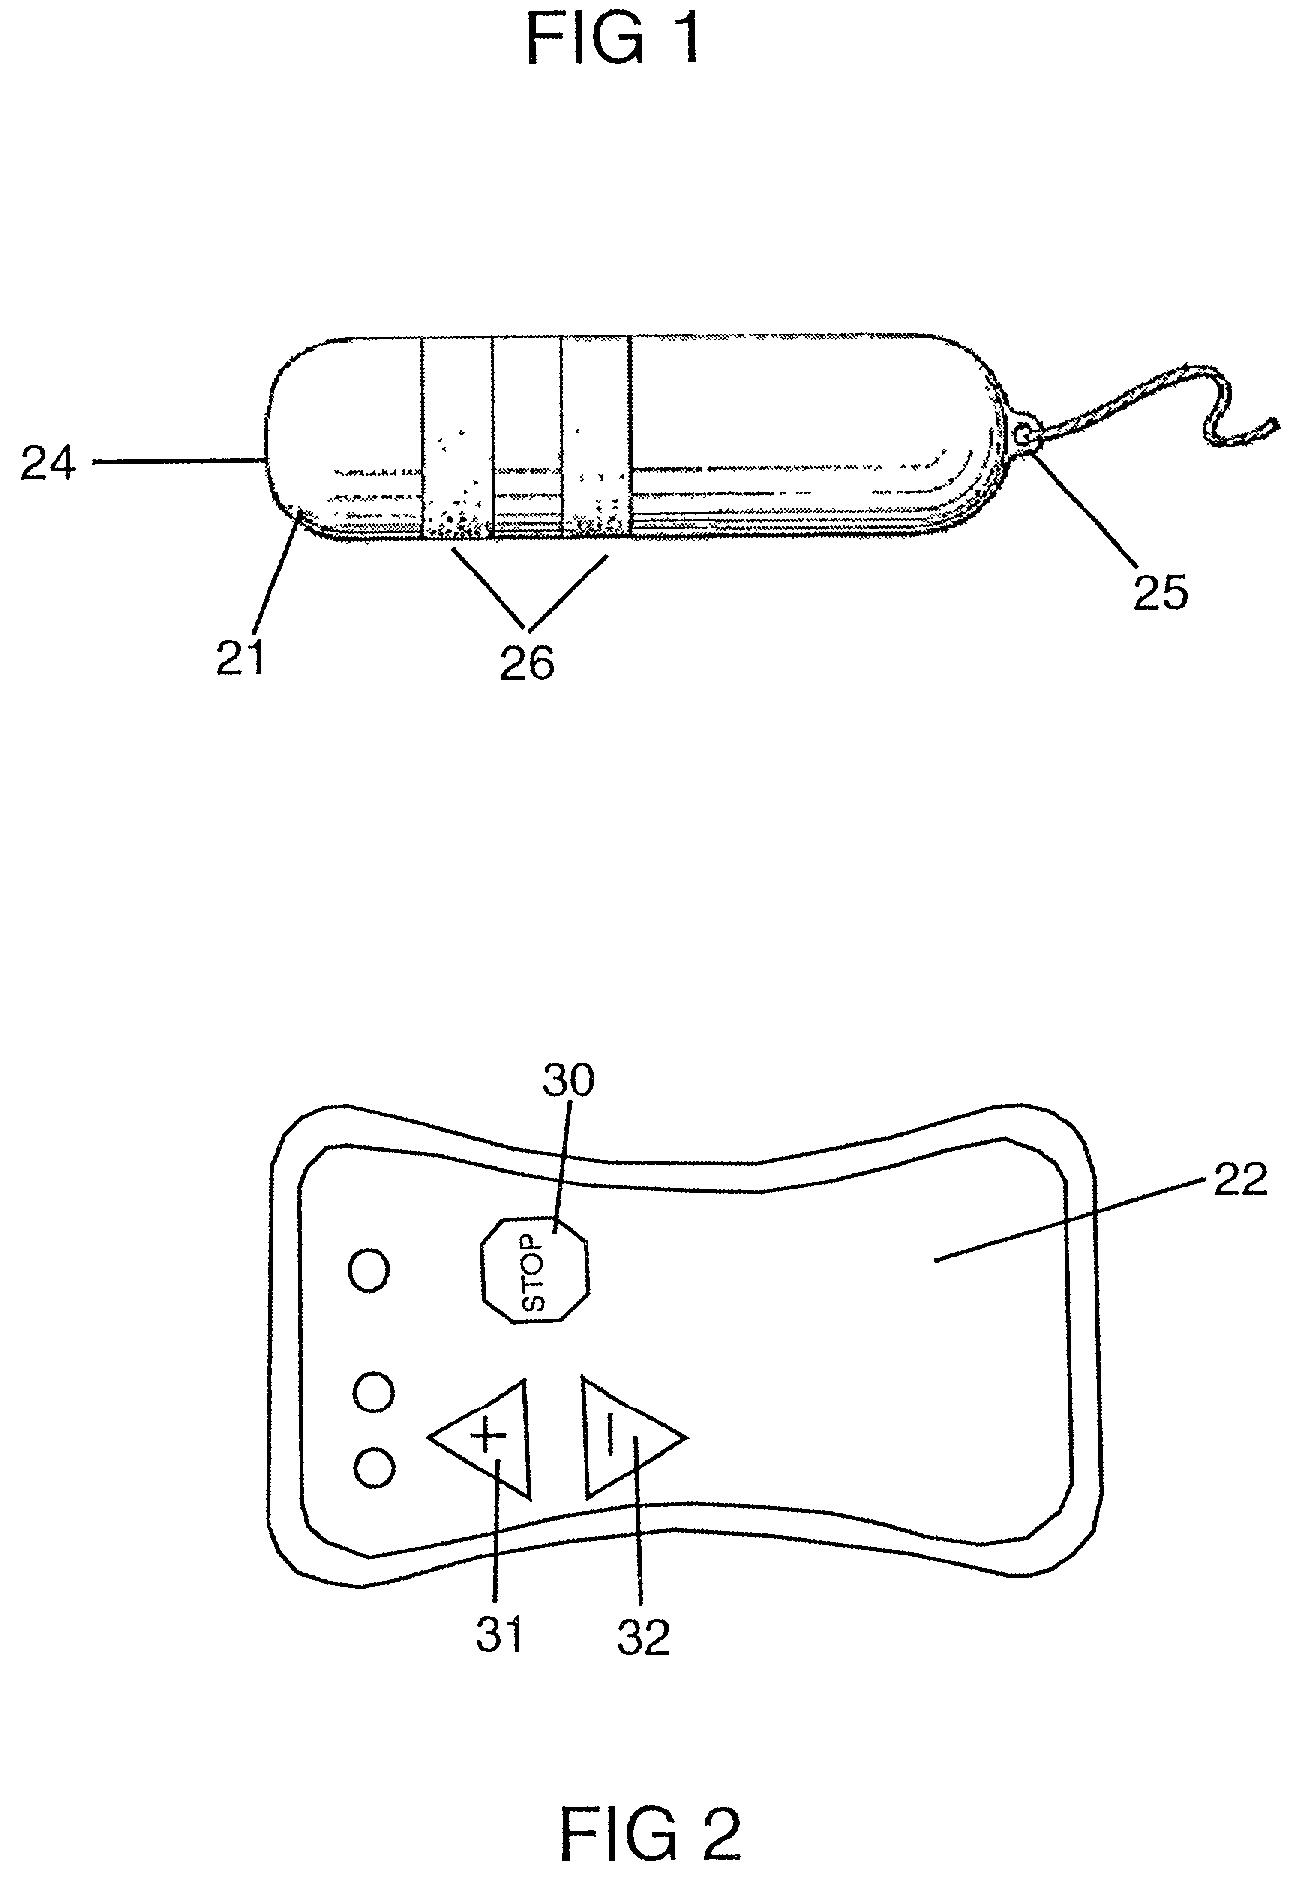 System and method for transducing, sensing, or affecting vaginal or body conditions, and/or stimulating perineal musculature and nerves using 2-way wireless communications